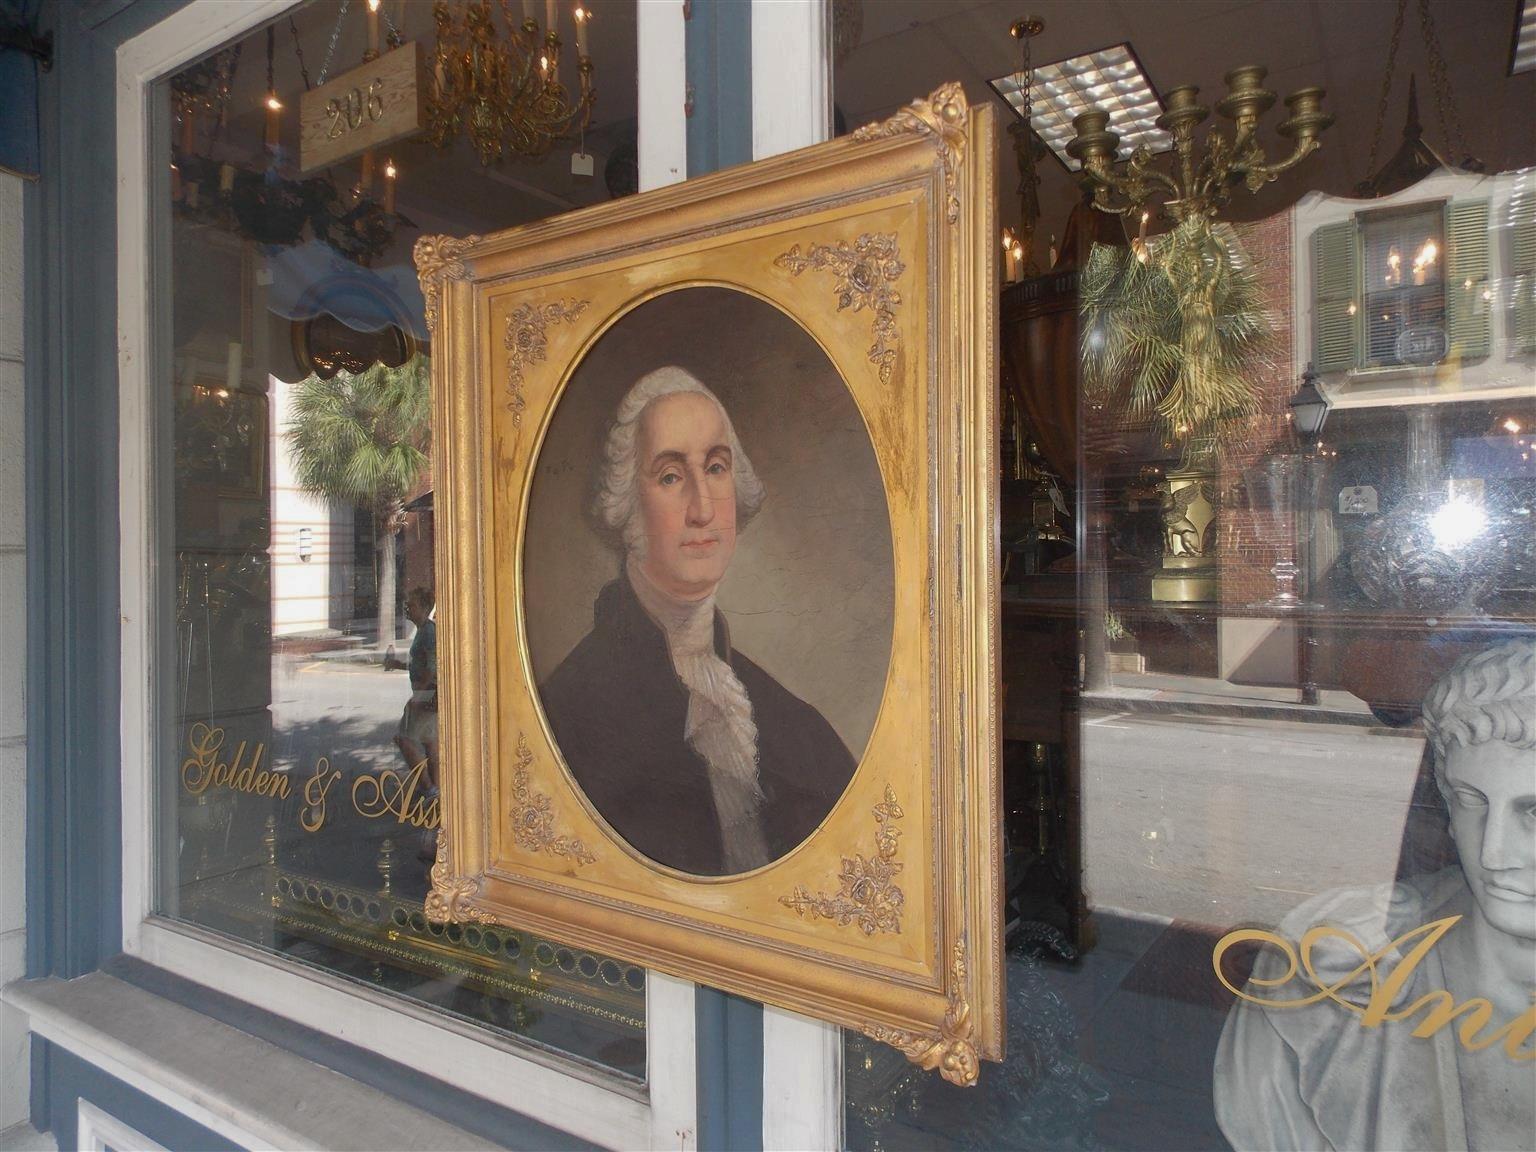 American oval portrait of George Washington oil on canvas in the original gilt floral frame and wood back, unsigned, Copied from the original painting by Gilbert Stuart. Early 19th century.